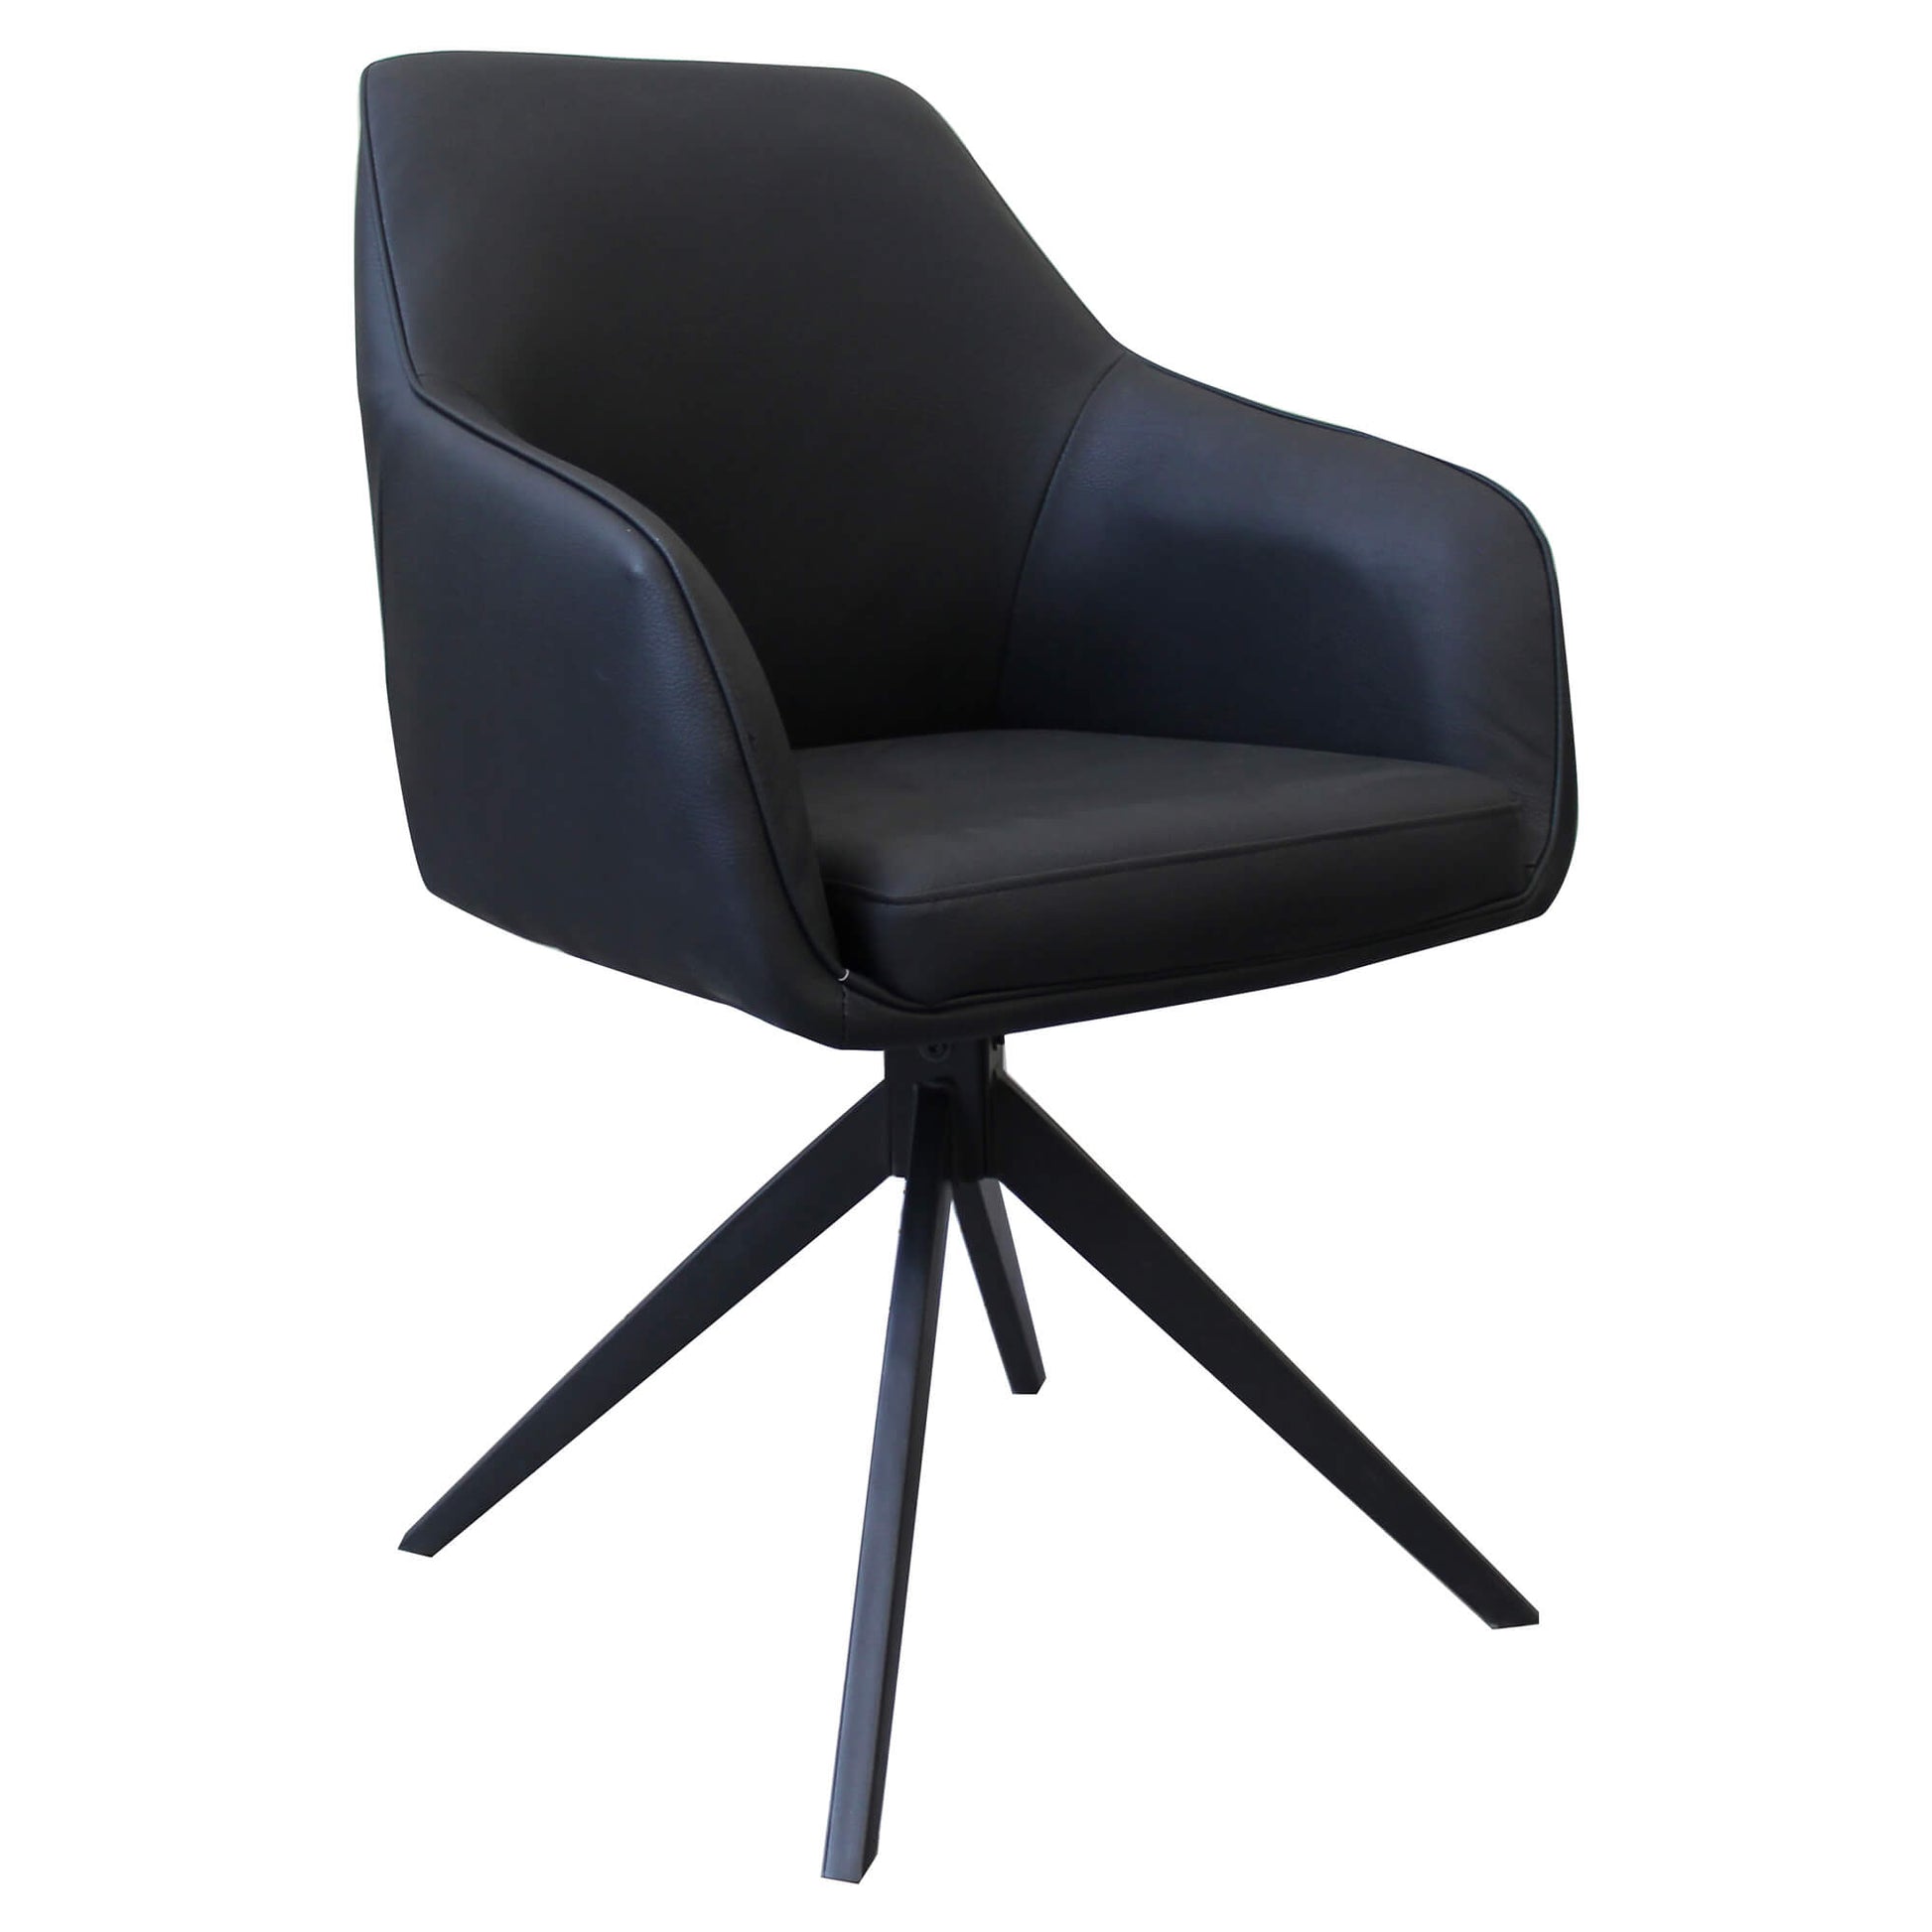 Clements | Olive Fabric Black Eco Leather Swivel Dining Chairs With Arms | Set Of 2 | Black